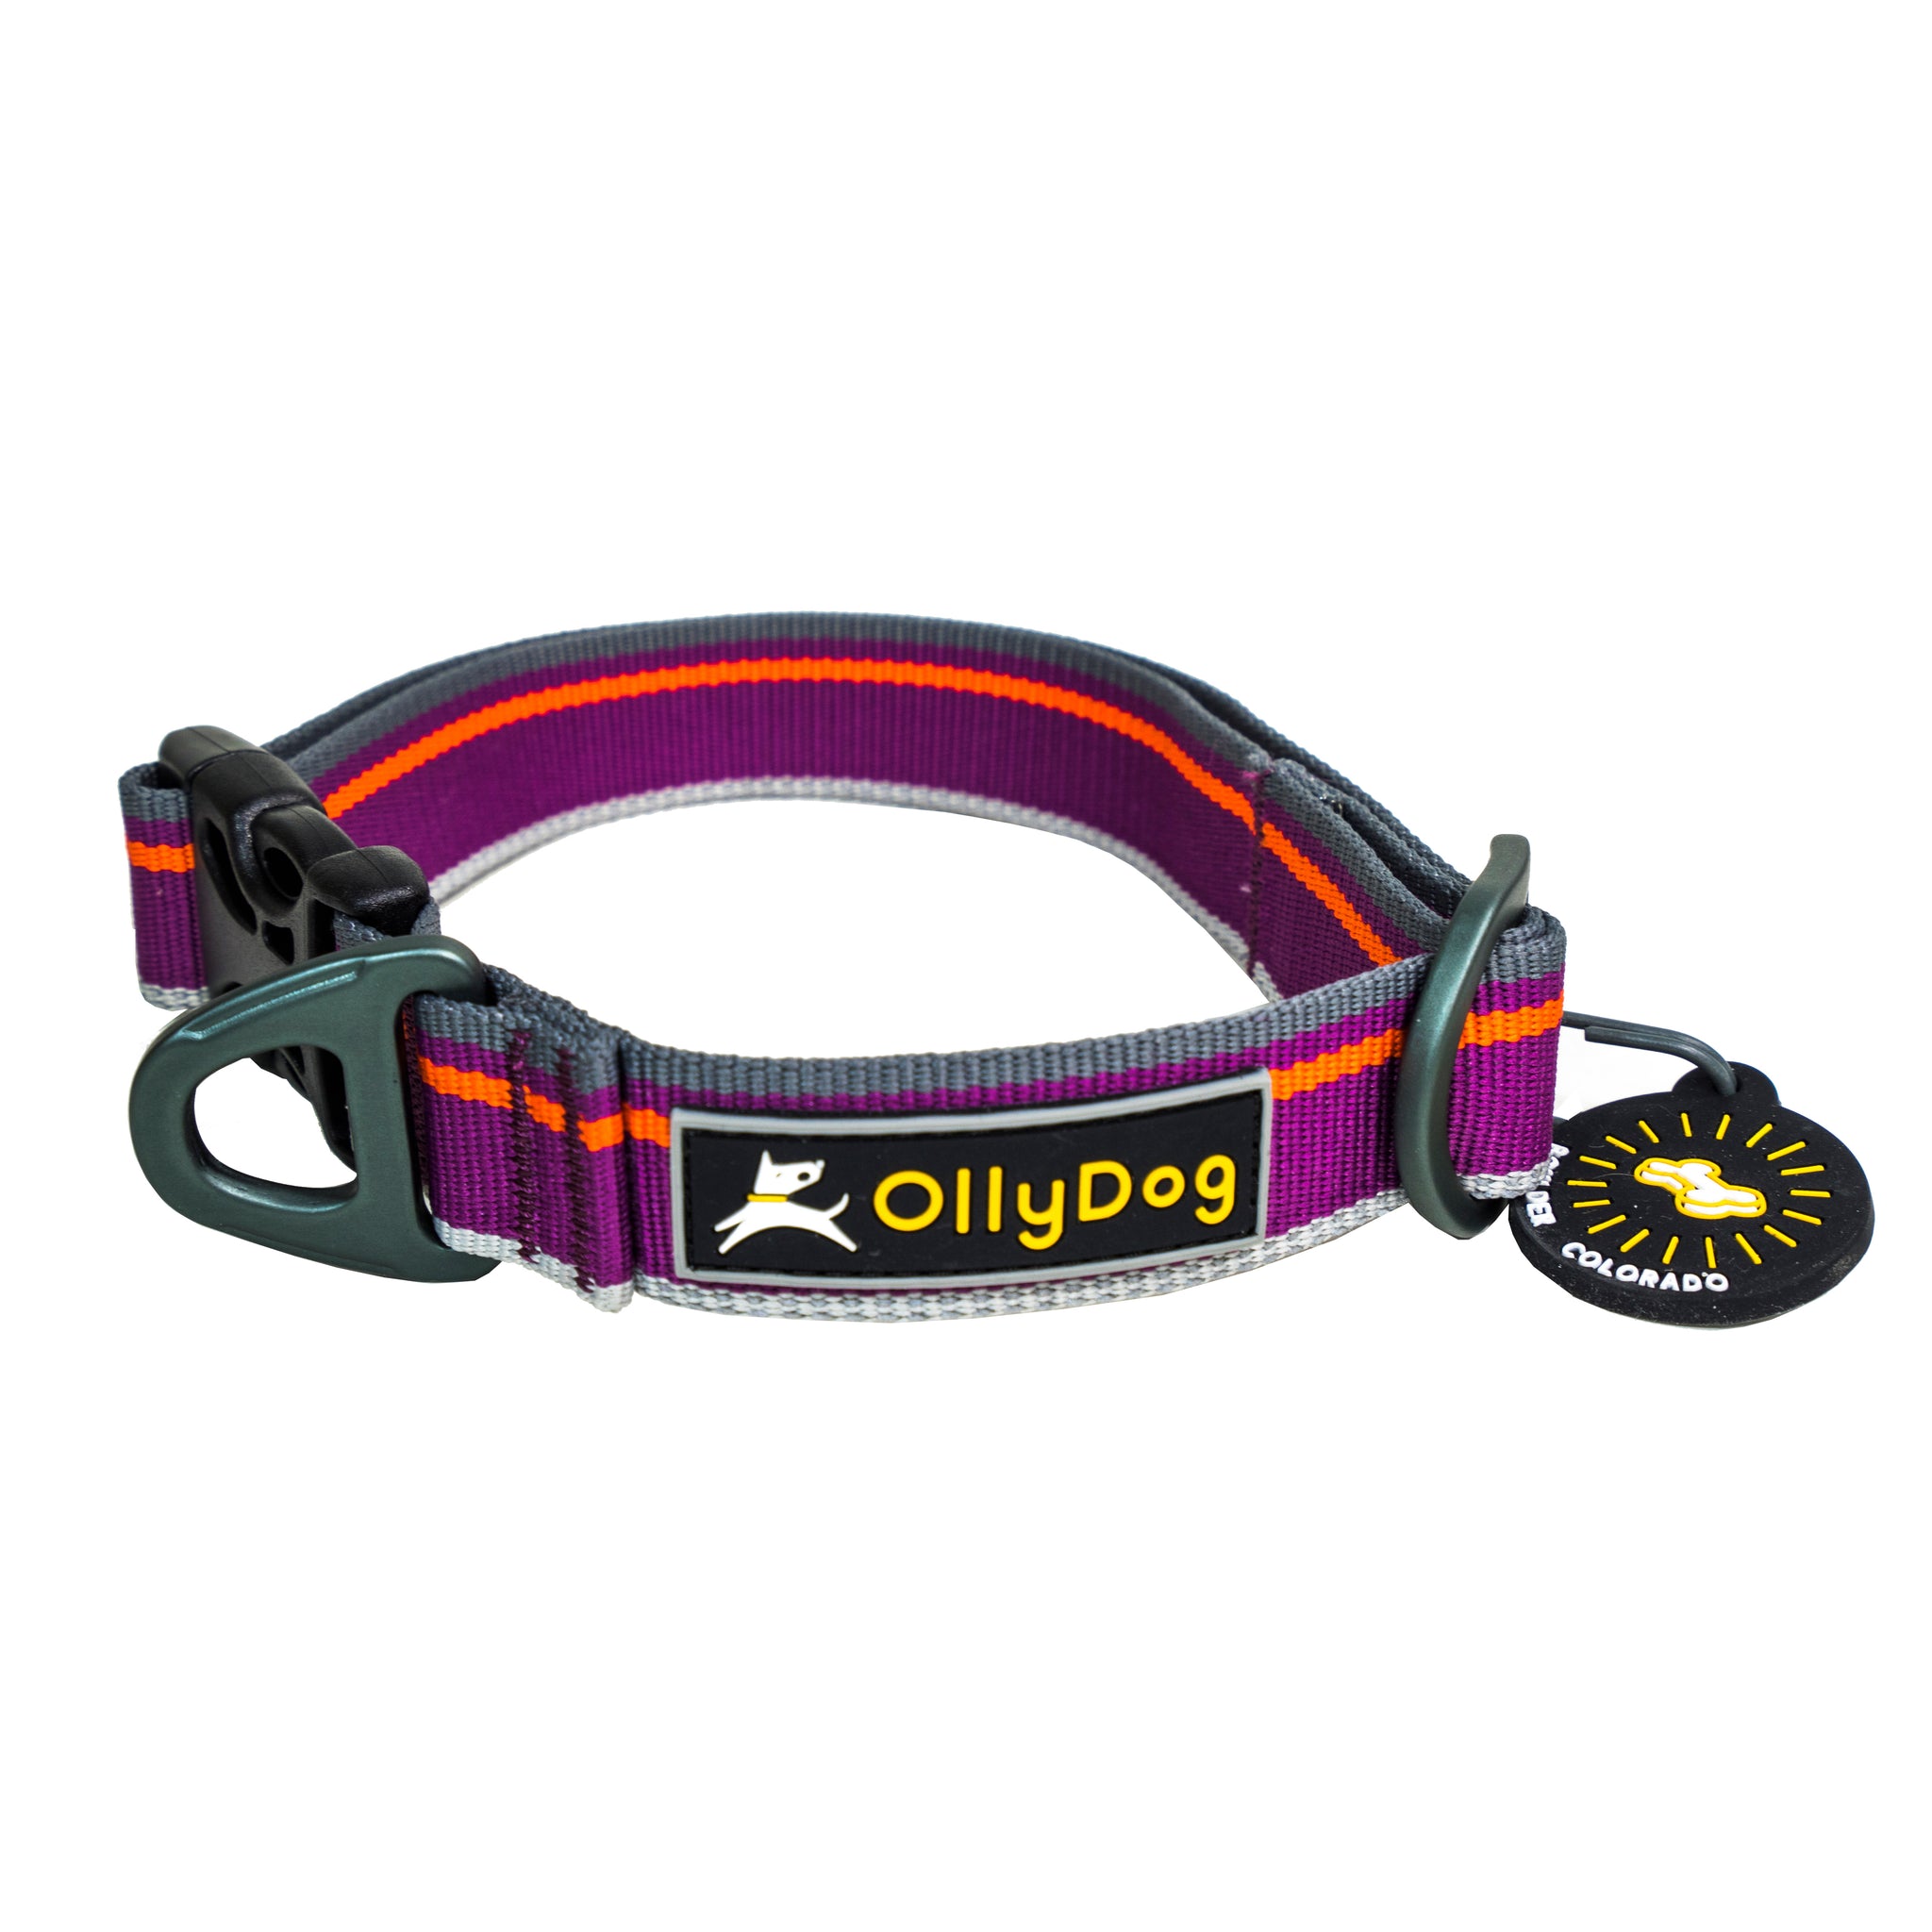 Urban Journey Reflective Collar- Save 20% at Checkout